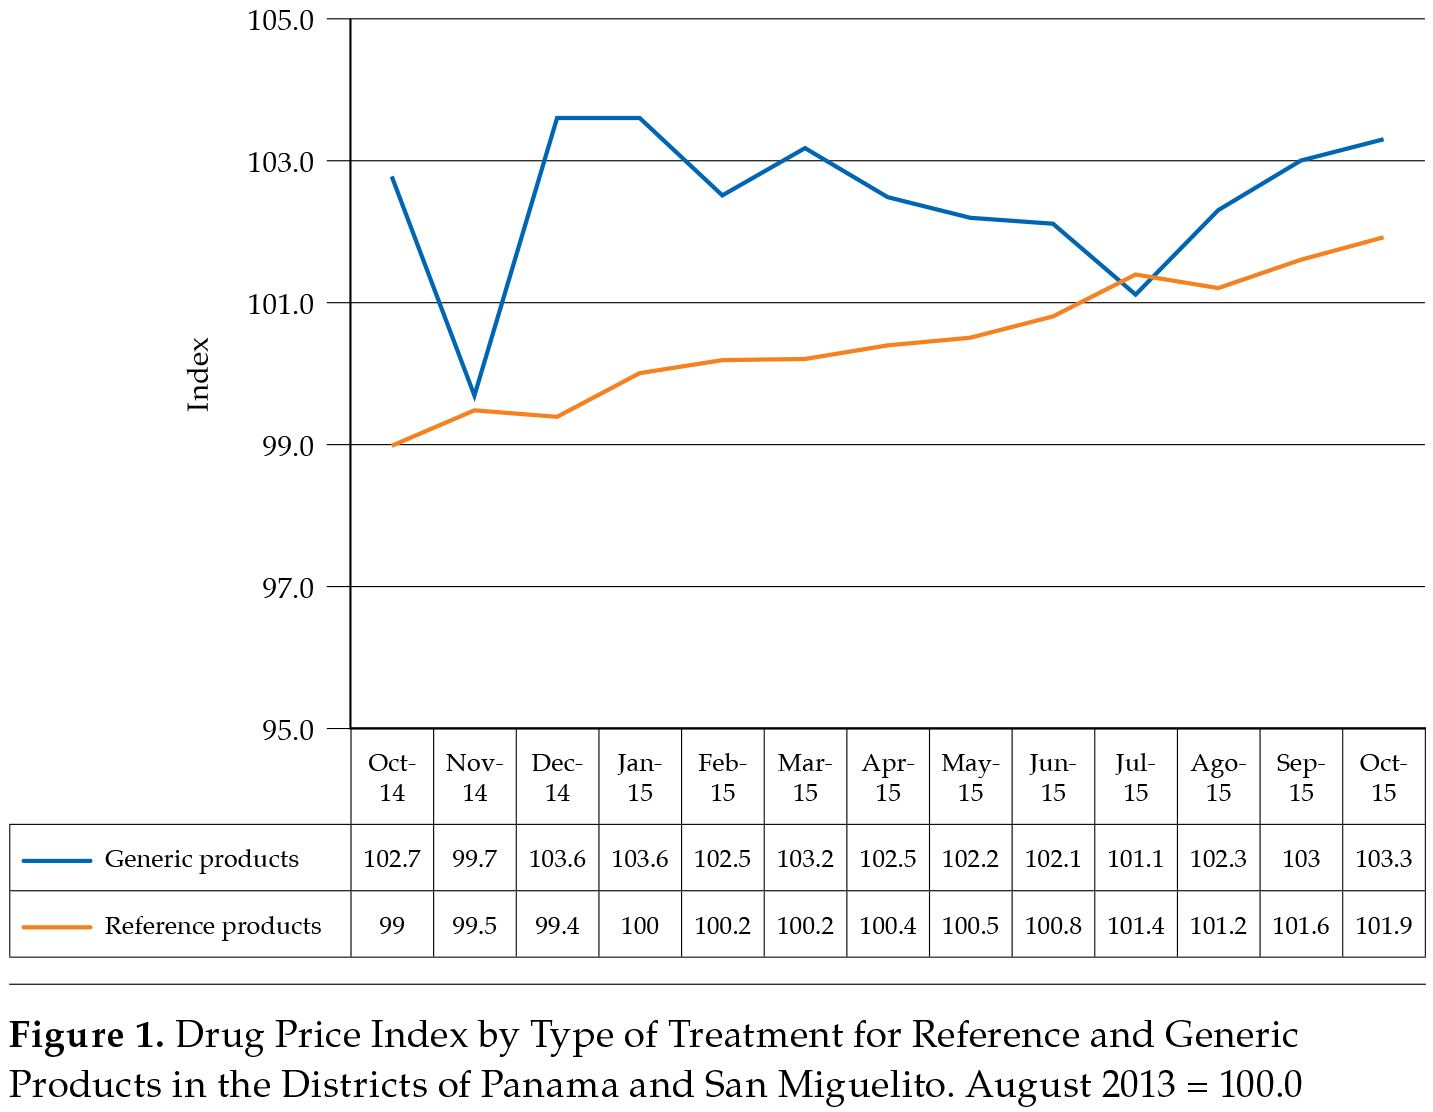 Drug Price Index by Type of Treatment for Reference and Generic Products in the Districts of Panama and San Miguelito. August 2013 = 100.0